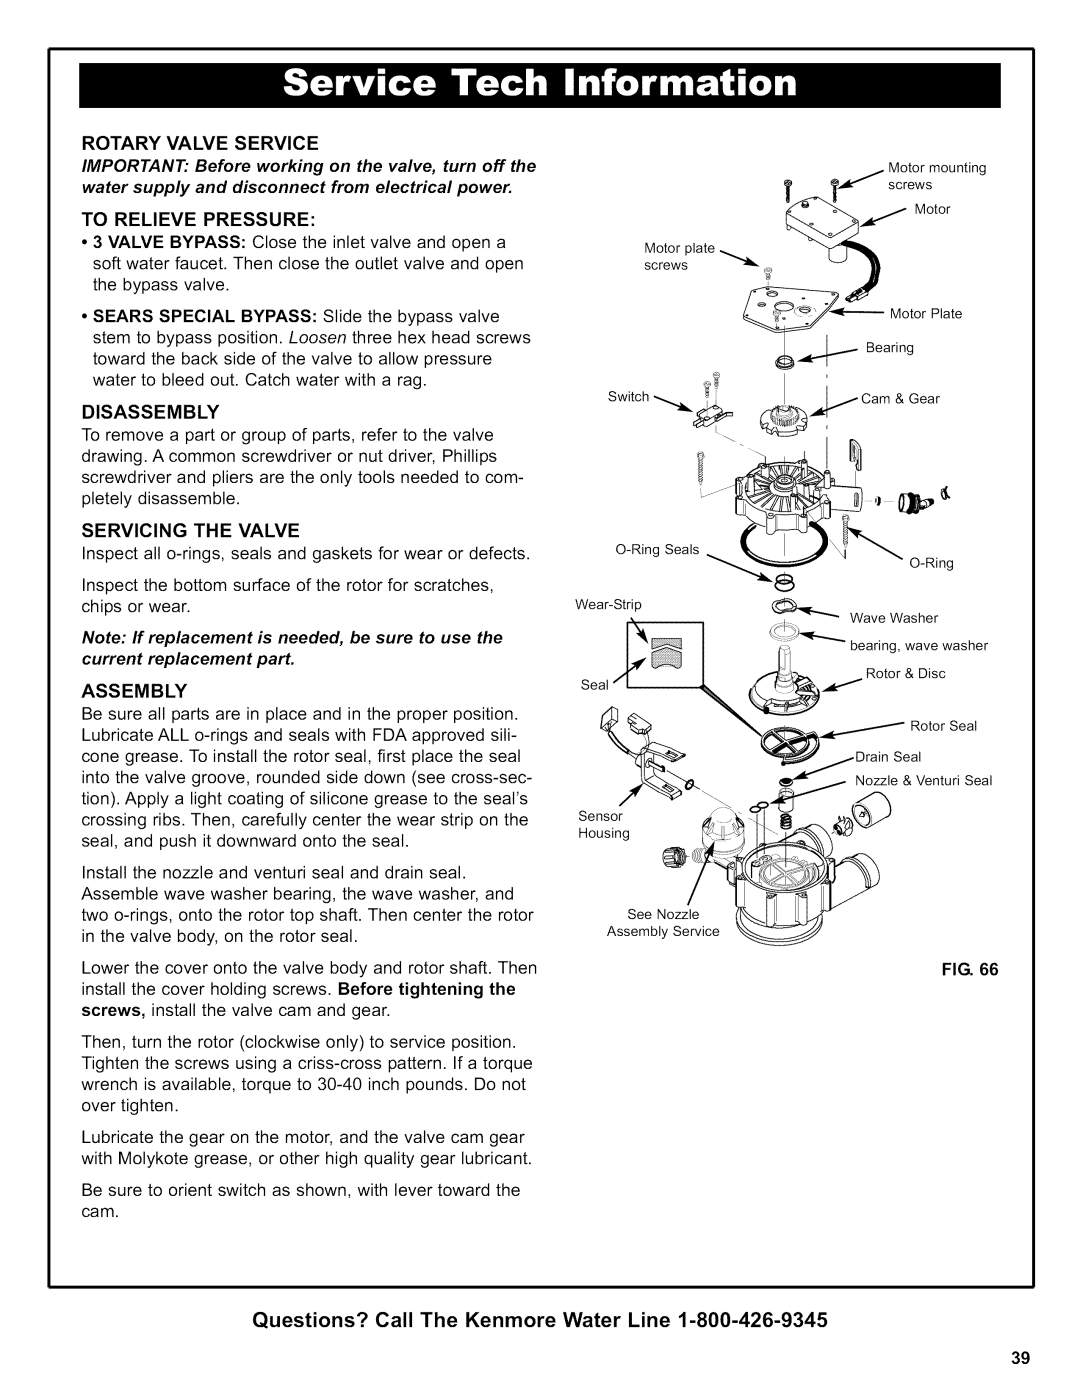 Kenmore 625.38376 owner manual Rotaryvalveservice, Questions? Call The Kenmore Water Line, To Relieve Pressure, Disassembly 